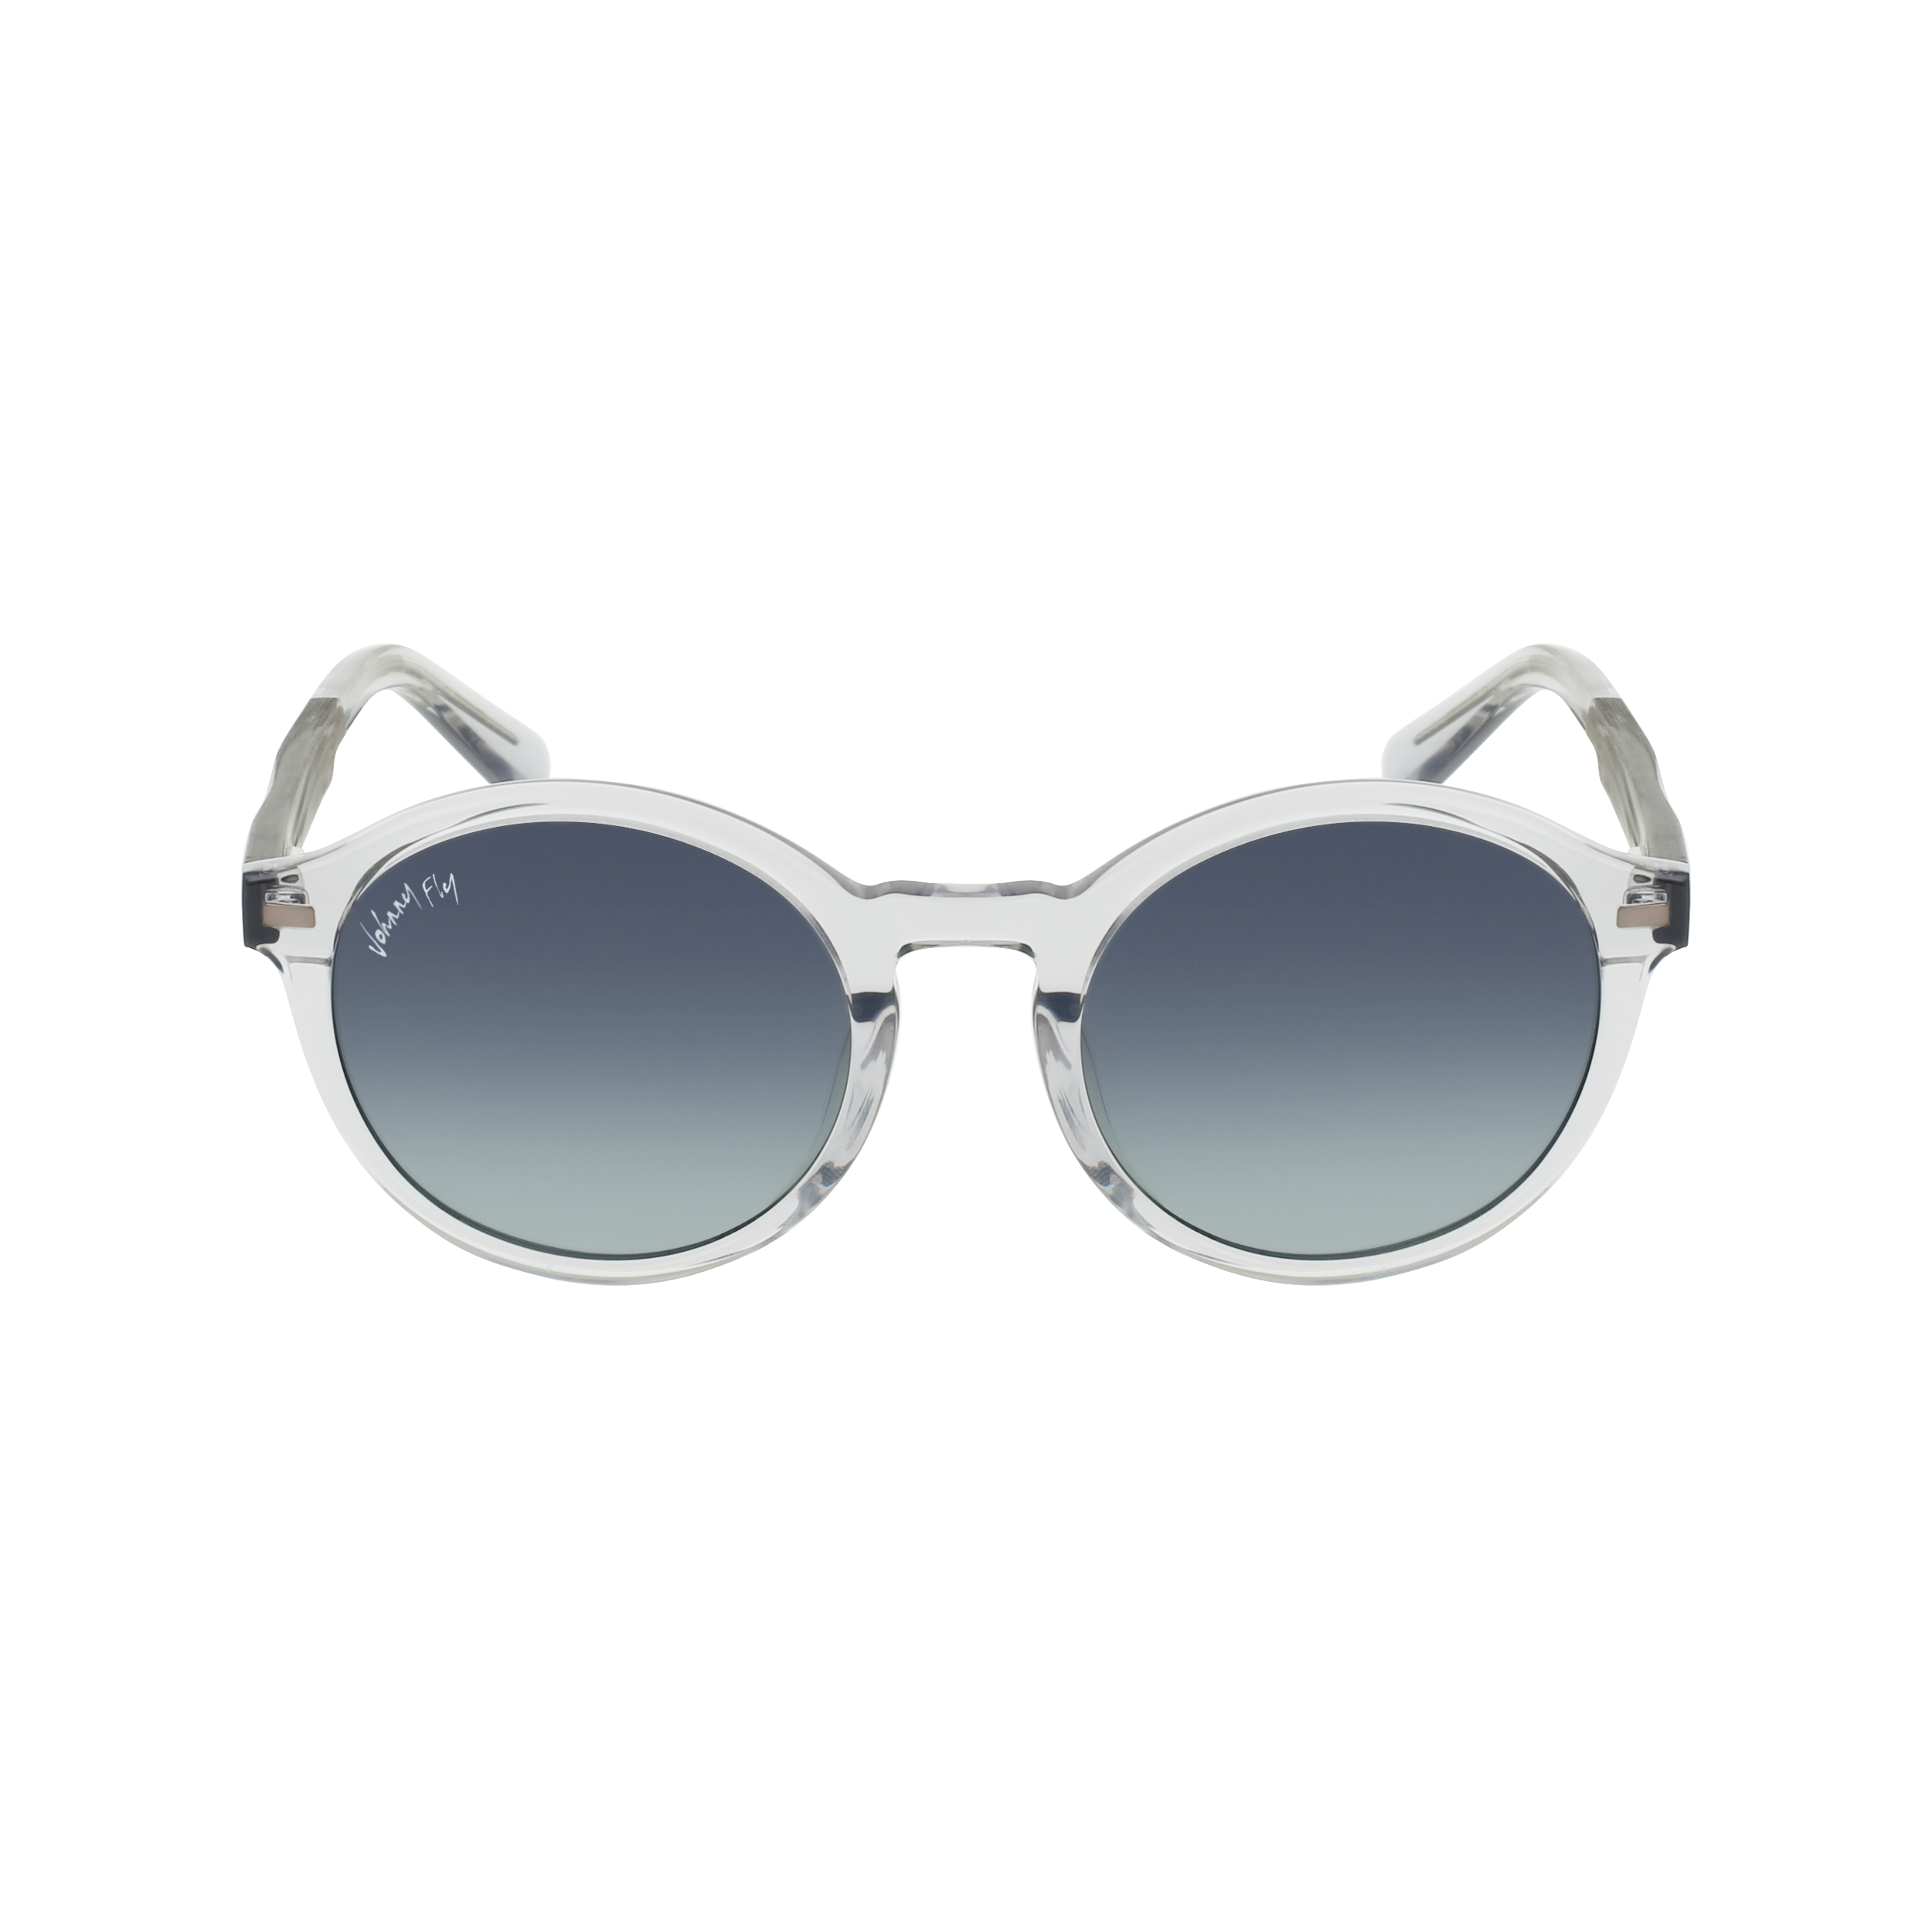 UFO Sunglasses Frame - Tinted Crystal- Johnny Fly | UFO-TCRY-POL-SMK-BWAL | | 